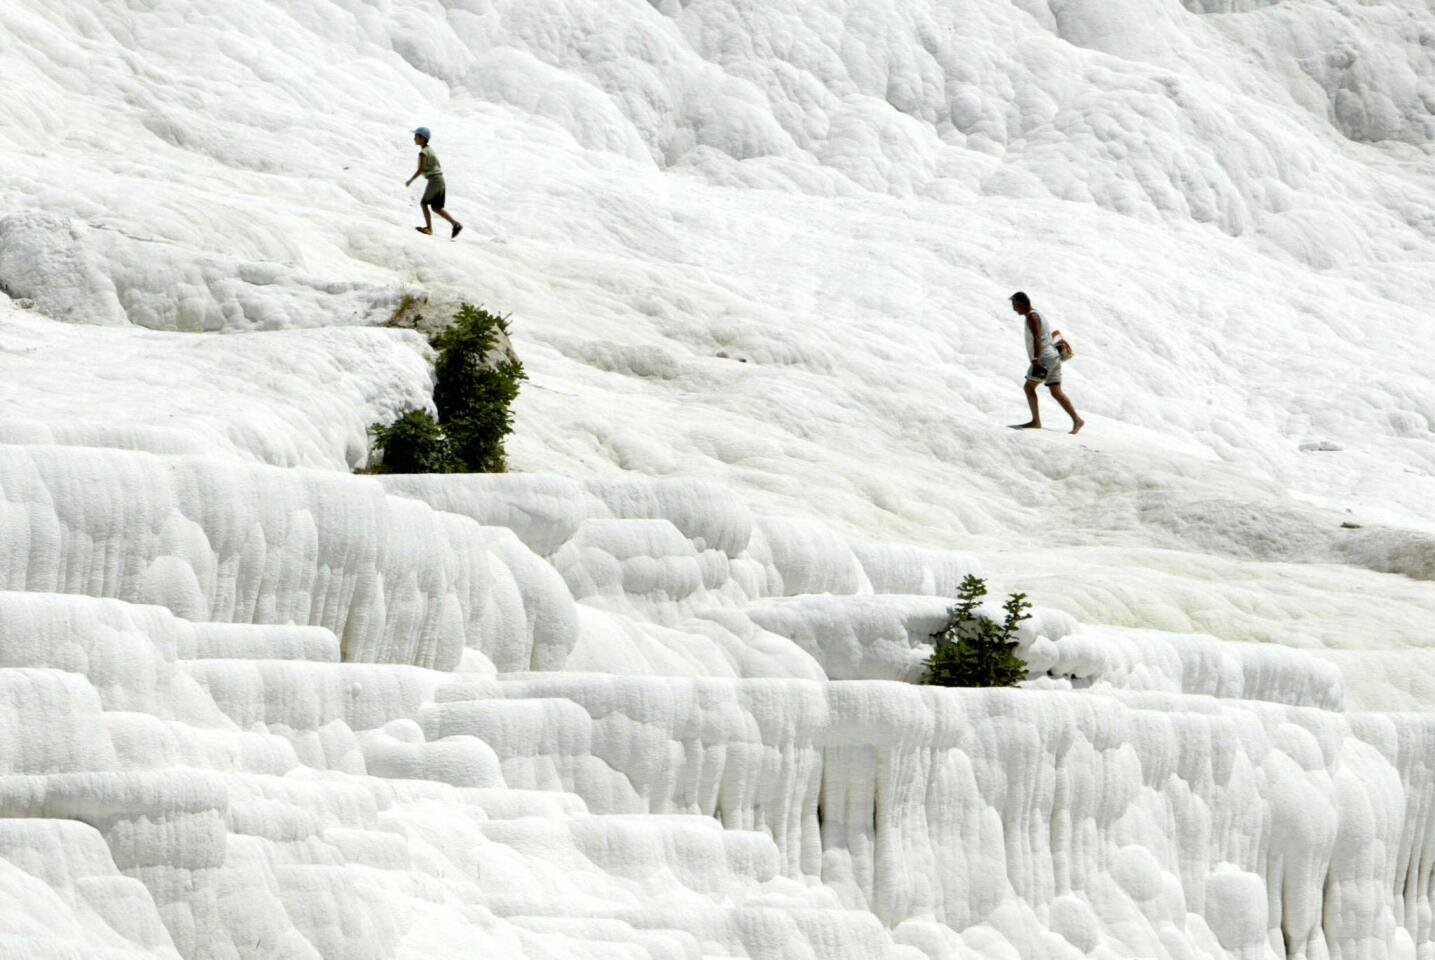 Popular since ancient times, the Pamukkale hot springs are one of Turkey's top attractions. The name itself means "Cotton Castle," which describes the fluffy-looking mineral deposits. More photos...